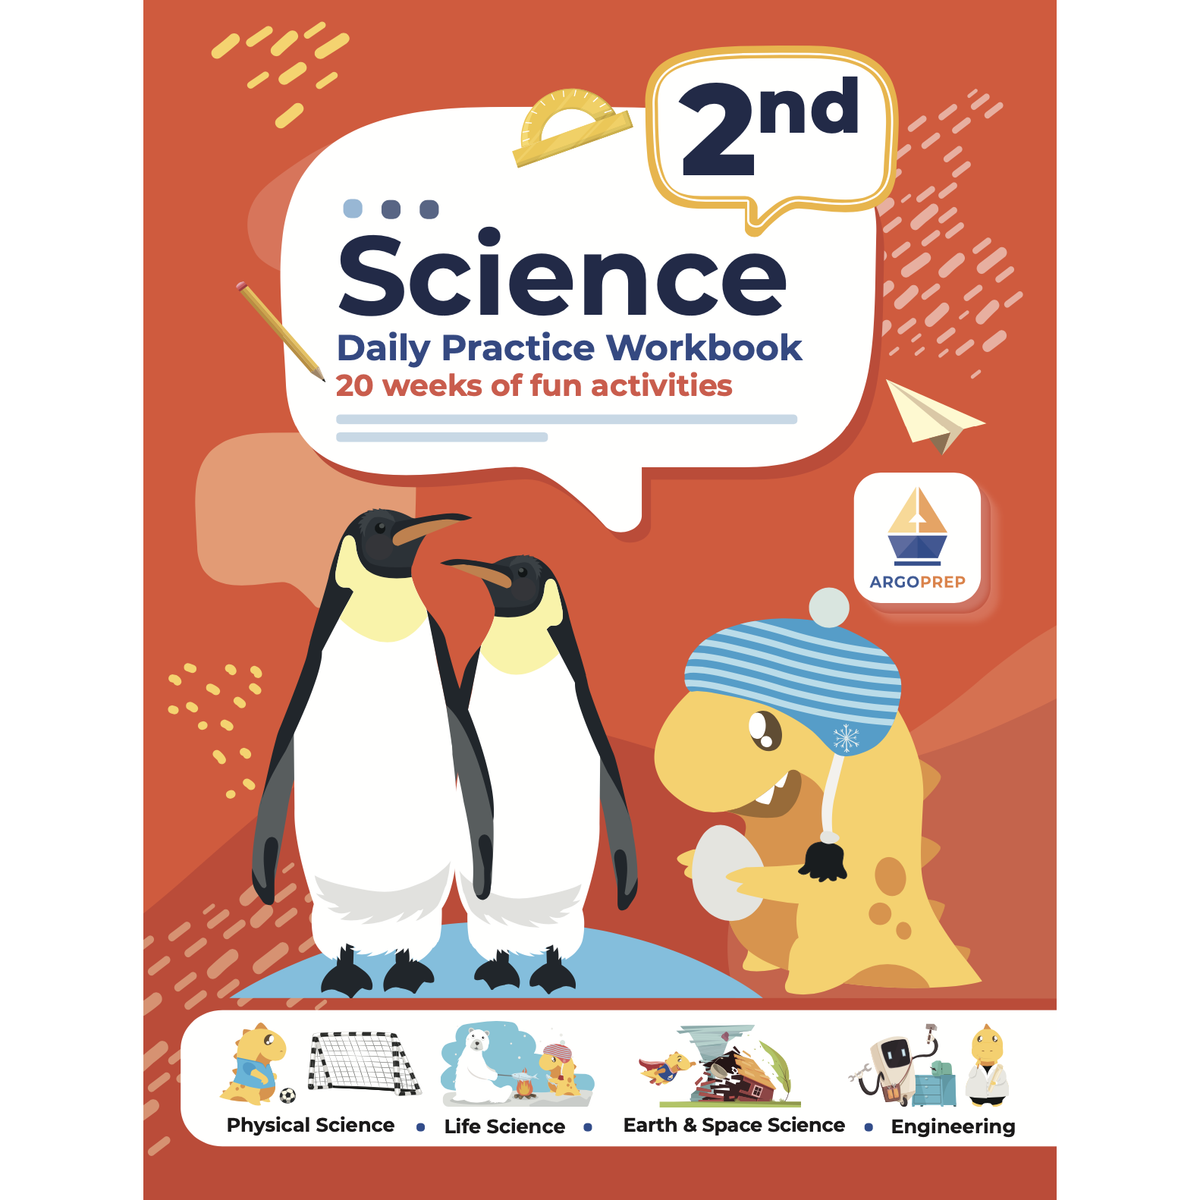 2nd Grade Science: Daily Practice Workbook